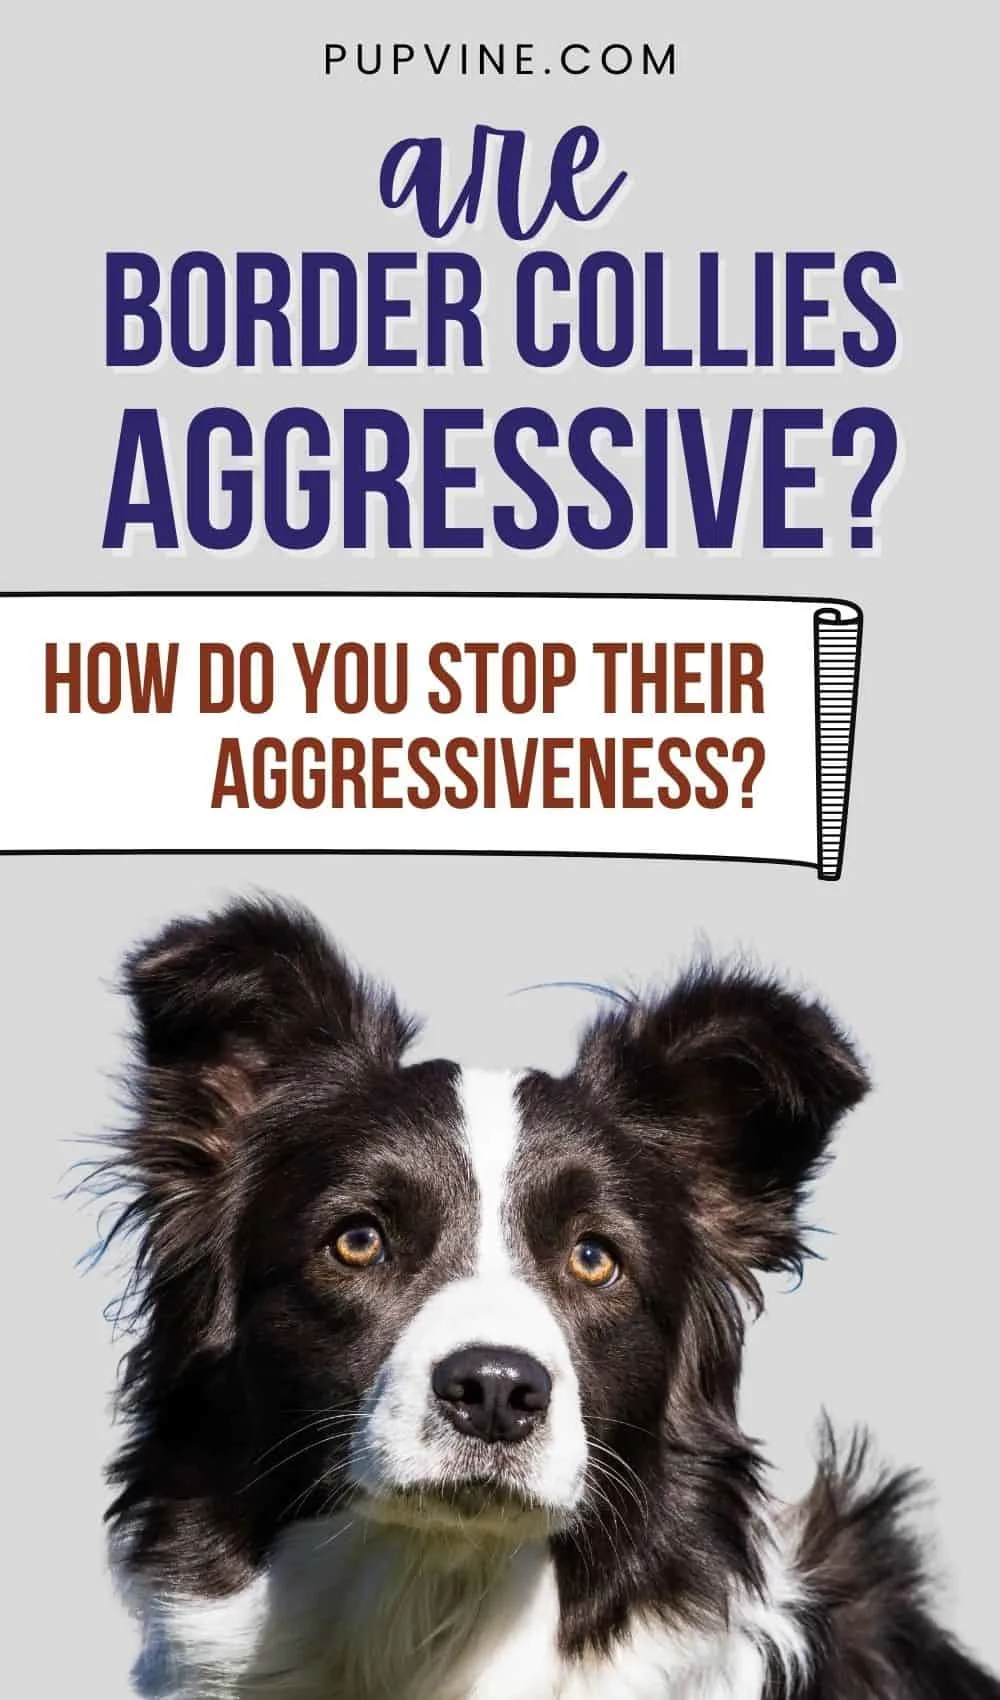 Are Border Collies Aggressive? How Do You Stop Their Aggressiveness?